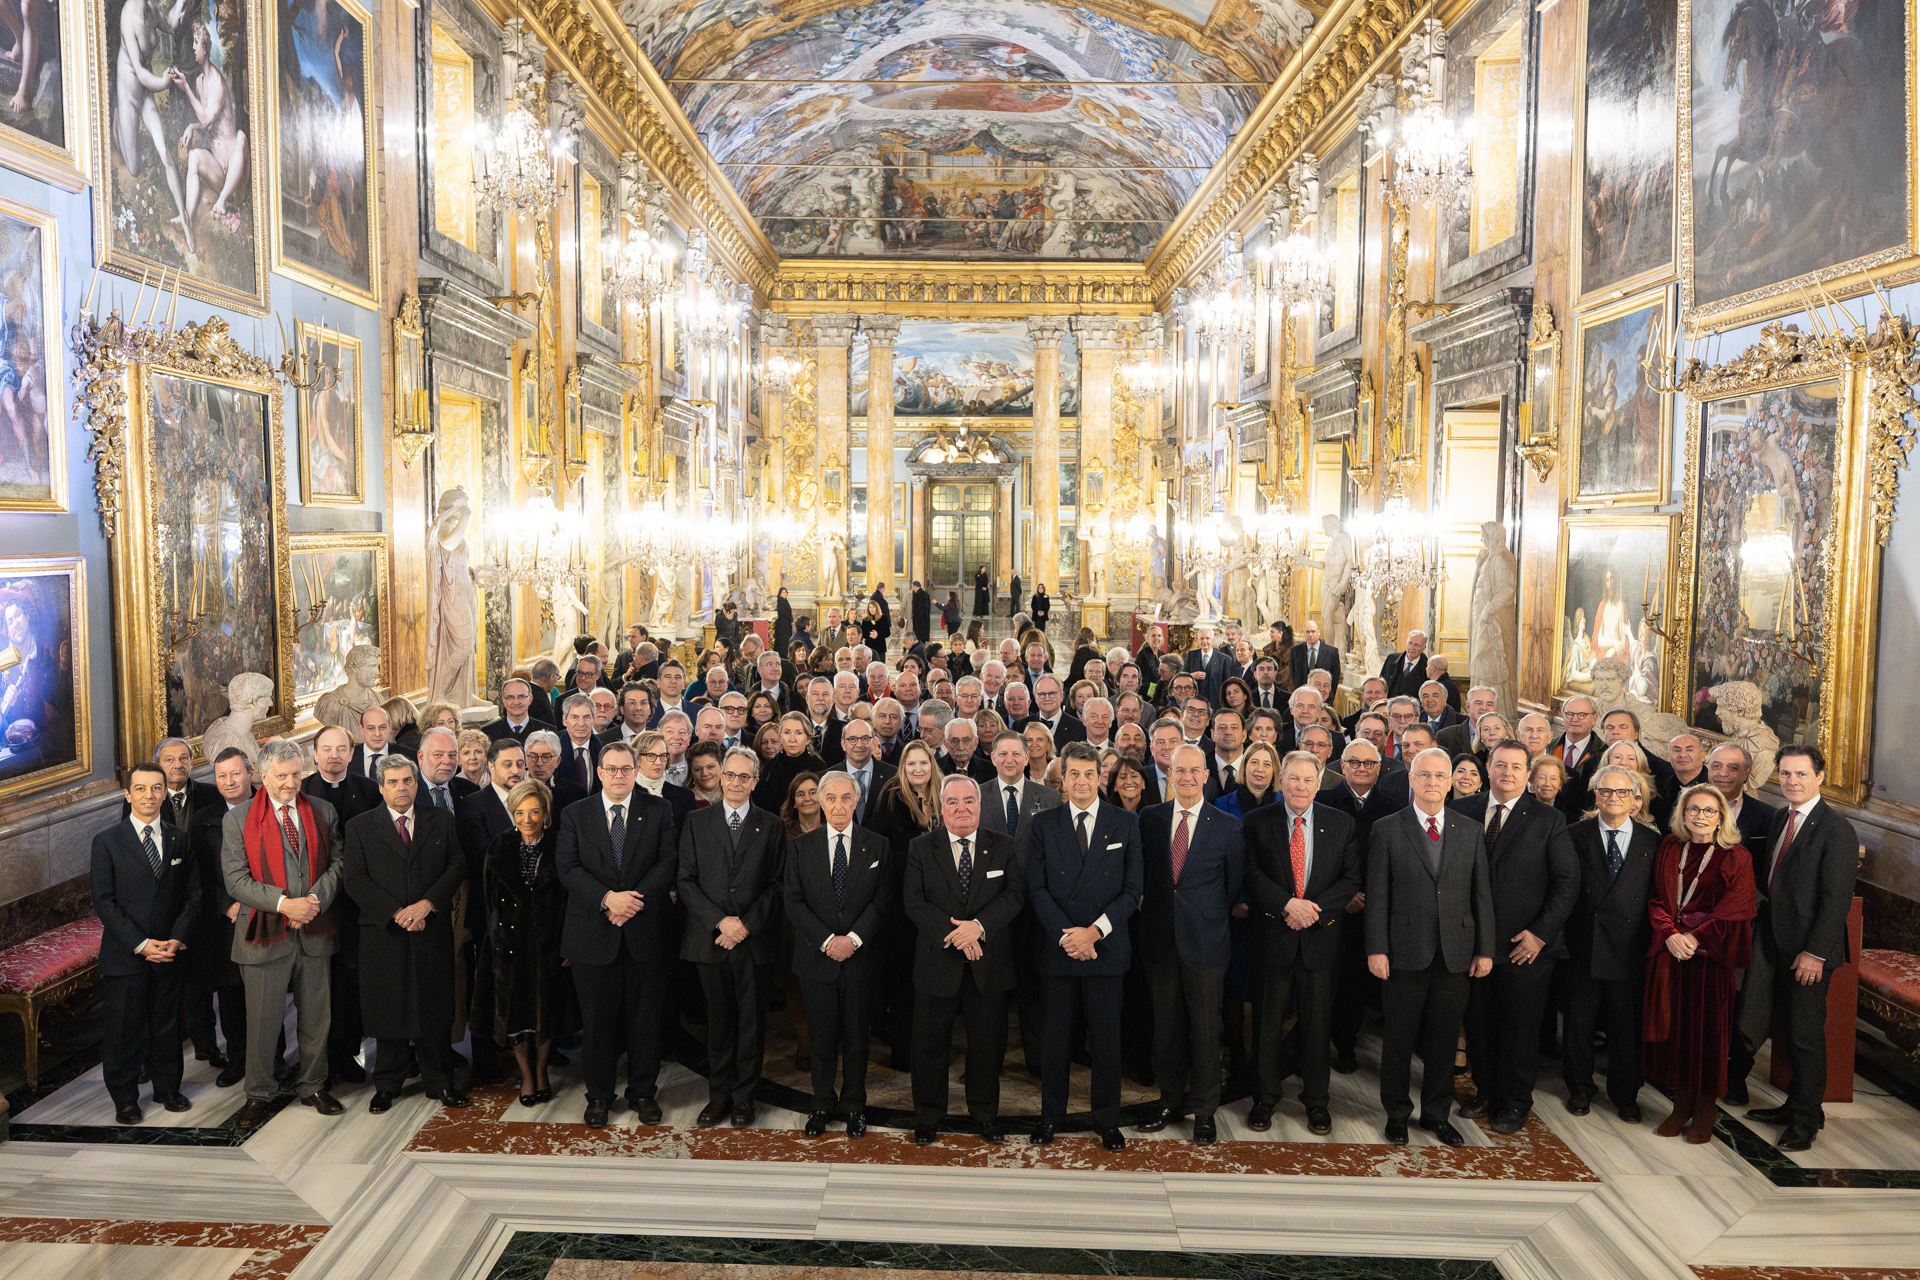 Conference of the Ambassadors of the Order of Malta, Rome